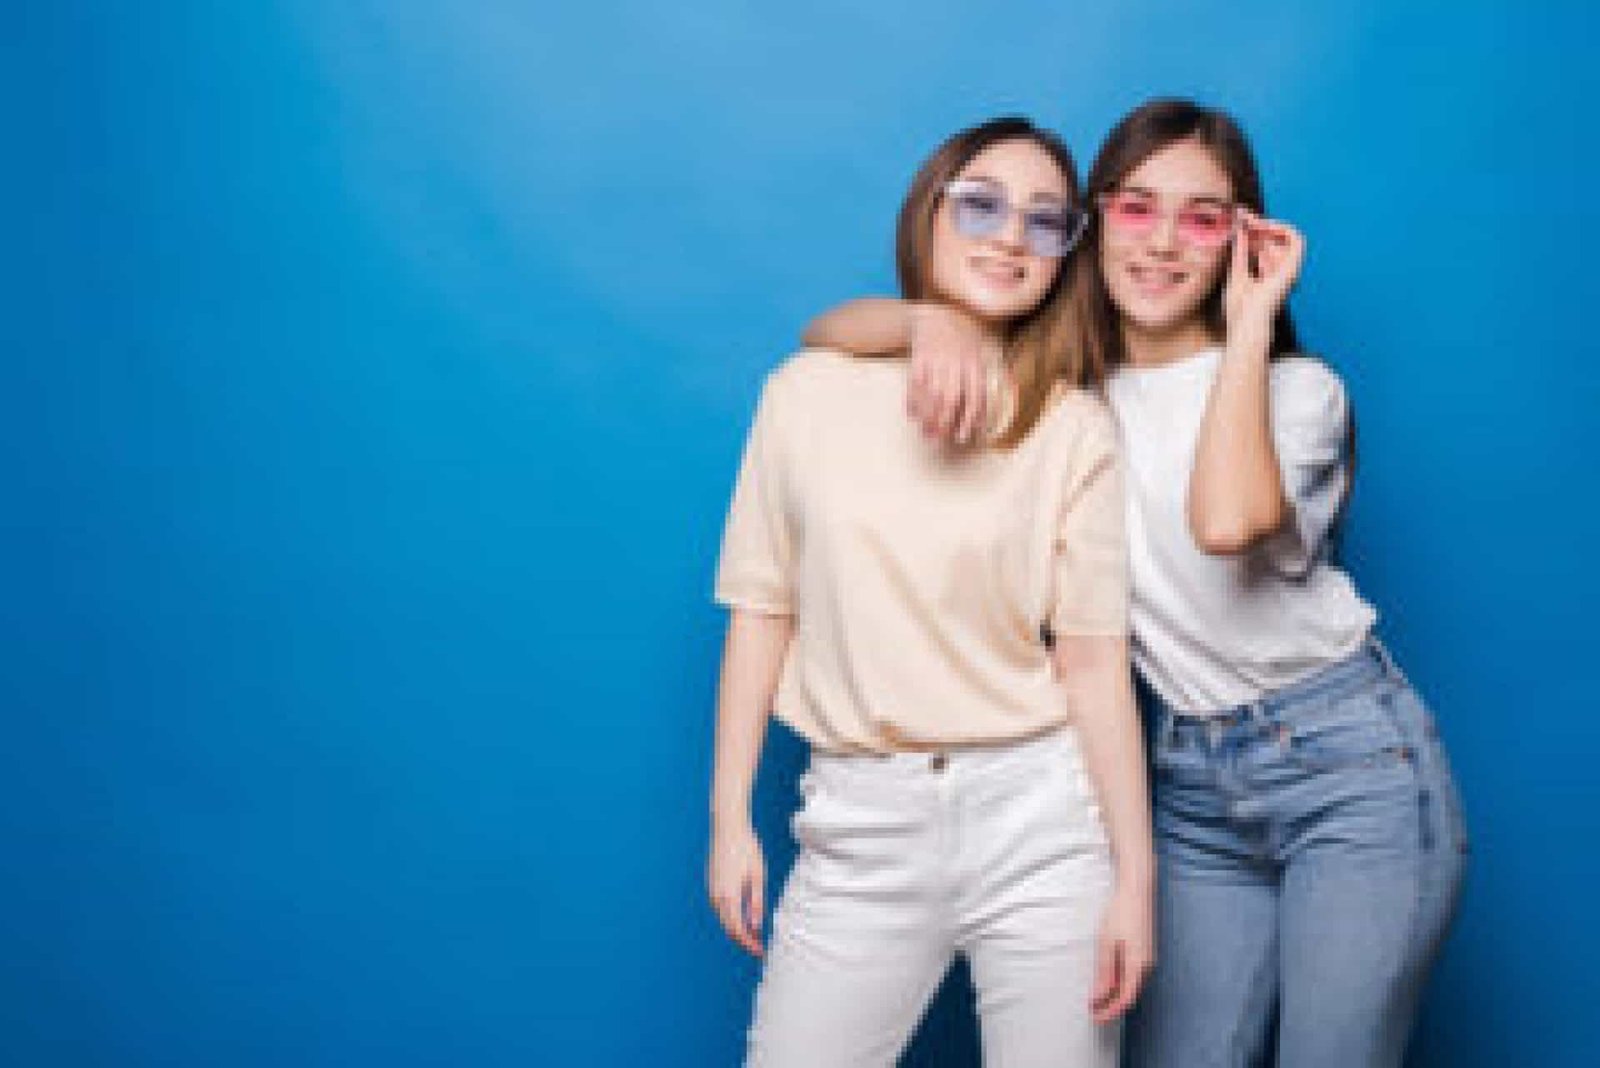 friends-forever-two-cute-lovely-girl-friends-sunglasses-posing-with-smile-isolated-blue-wall